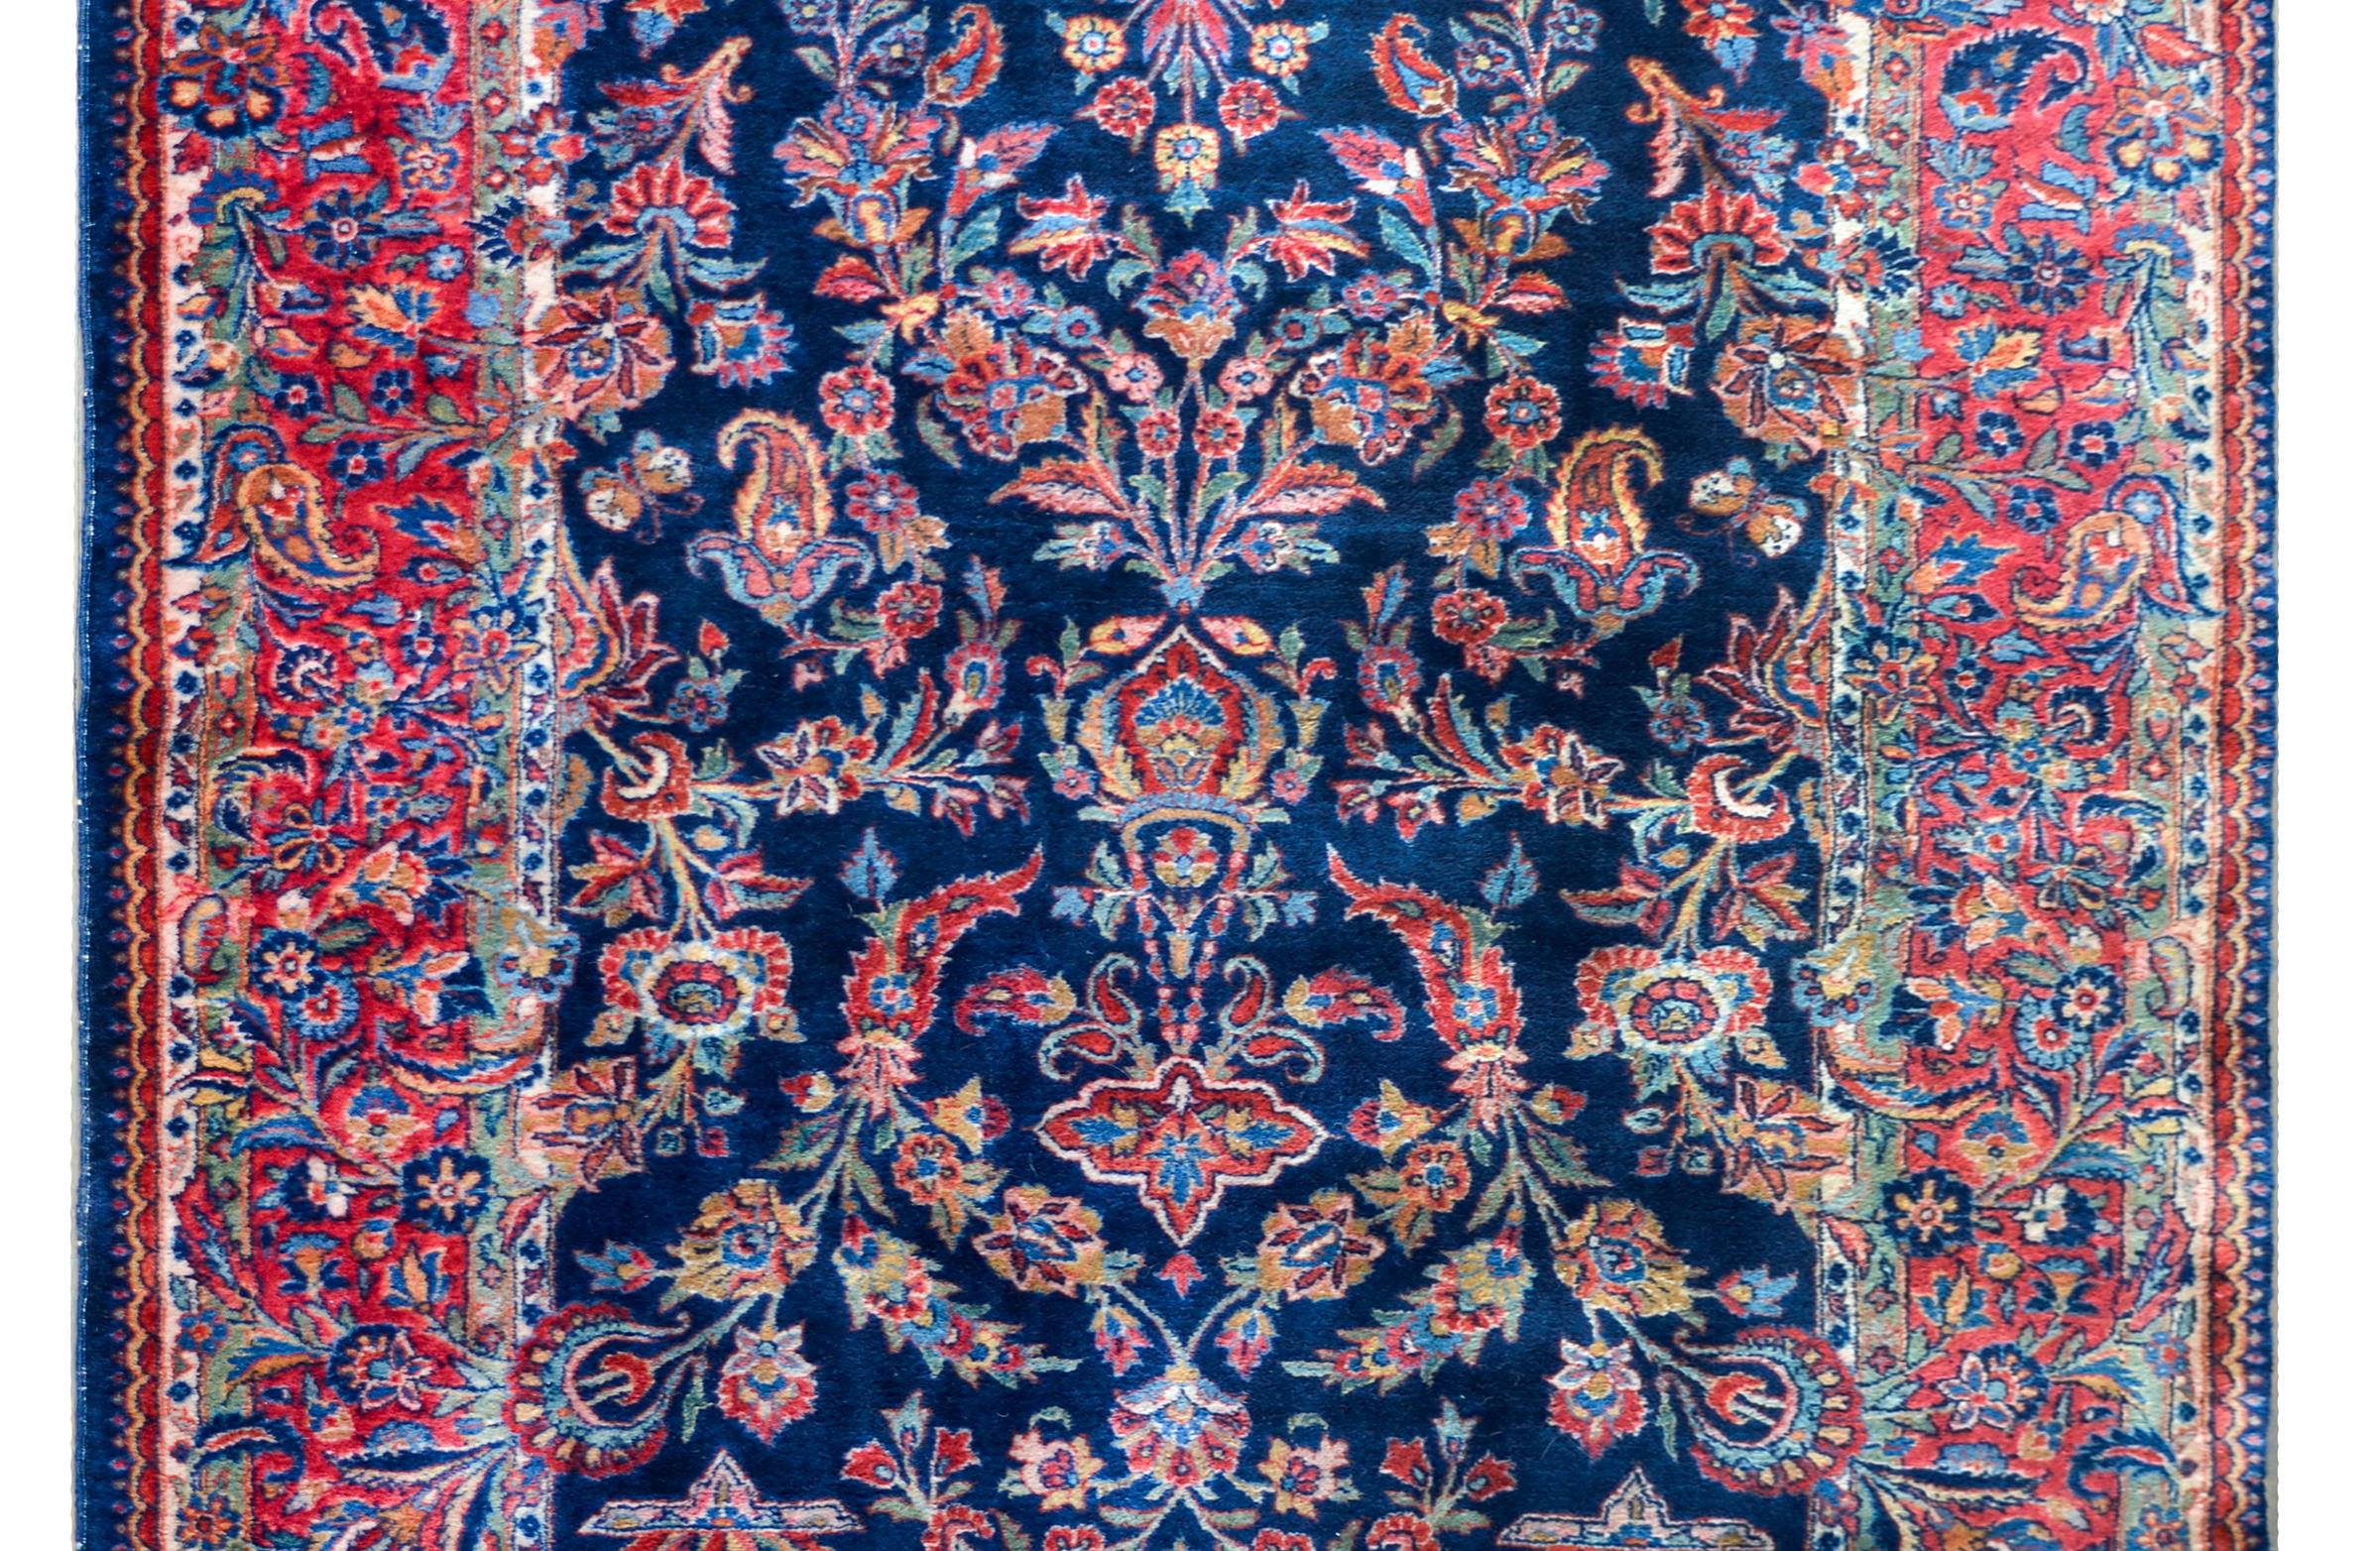 An early 20th century Persian Kashan rug with a mirrored pattern containing myriad flowers woven in reds, blues, golds, and greens, and set against a dark indigo background. The border is fantastic composed with more flowers woven in similar colors